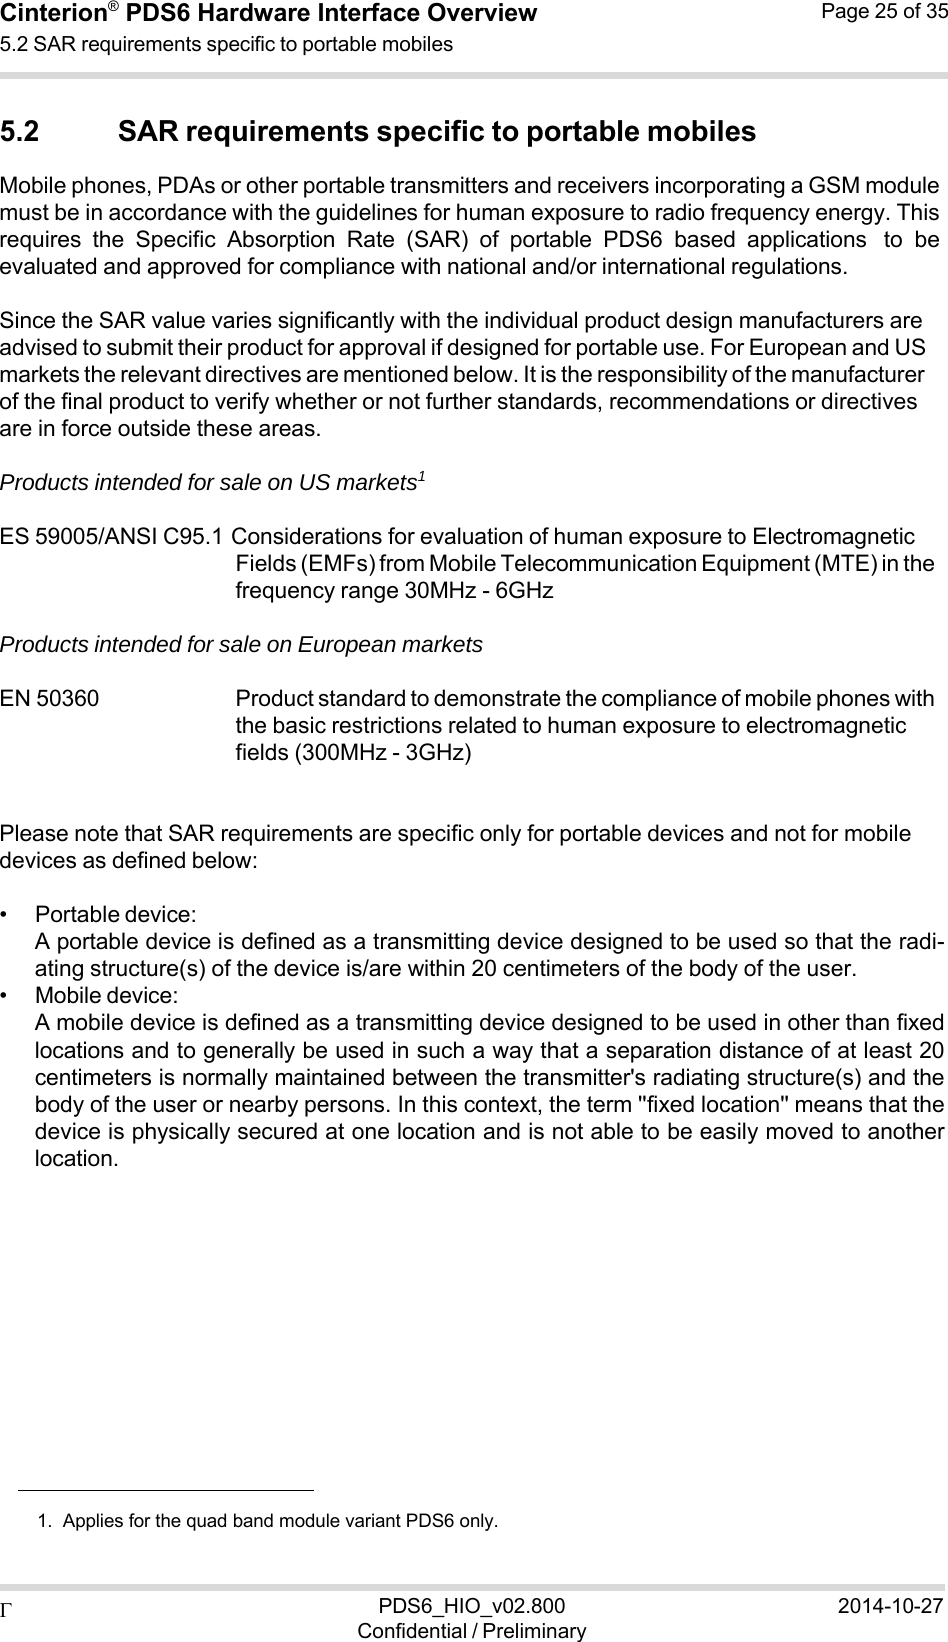  PDS6_HIO_v02.800Confidential / Preliminary2014-10-27Cinterion®  PDS6 Hardware Interface Overview 5.2 SAR requirements specific to portable mobiles Page 25 of 35   5.2 SAR requirements specific to portable mobiles Mobile phones, PDAs or other portable transmitters and receivers incorporating a GSM module must be in accordance with the guidelines for human exposure to radio frequency energy. This requires  the  Specific  Absorption  Rate  (SAR)  of  portable  PDS6  based  applications to  be evaluated and approved for compliance with national and/or international regulations.  Since the SAR value varies significantly with the individual product design manufacturers are advised to submit their product for approval if designed for portable use. For European and US markets the relevant directives are mentioned below. It is the responsibility of the manufacturer of the final product to verify whether or not further standards, recommendations or directives are in force outside these areas.  Products intended for sale on US markets1  ES 59005/ANSI C95.1 Considerations for evaluation of human exposure to Electromagnetic Fields (EMFs) from Mobile Telecommunication Equipment (MTE) in the frequency range 30MHz - 6GHz  Products intended for sale on European markets  EN 50360   Product standard to demonstrate the compliance of mobile phones with the basic restrictions related to human exposure to electromagnetic fields (300MHz - 3GHz)   Please note that SAR requirements are specific only for portable devices and not for mobile devices as defined below:  • Portable device: A portable device is defined as a transmitting device designed to be used so that the radi- ating structure(s) of the device is/are within 20 centimeters of the body of the user. • Mobile device: A mobile device is defined as a transmitting device designed to be used in other than fixed locations and to generally be used in such a way that a separation distance of at least 20 centimeters is normally maintained between the transmitter&apos;s radiating structure(s) and the body of the user or nearby persons. In this context, the term &apos;&apos;fixed location&apos;&apos; means that the device is physically secured at one location and is not able to be easily moved to another location.                1.  Applies for the quad band module variant PDS6 only. 